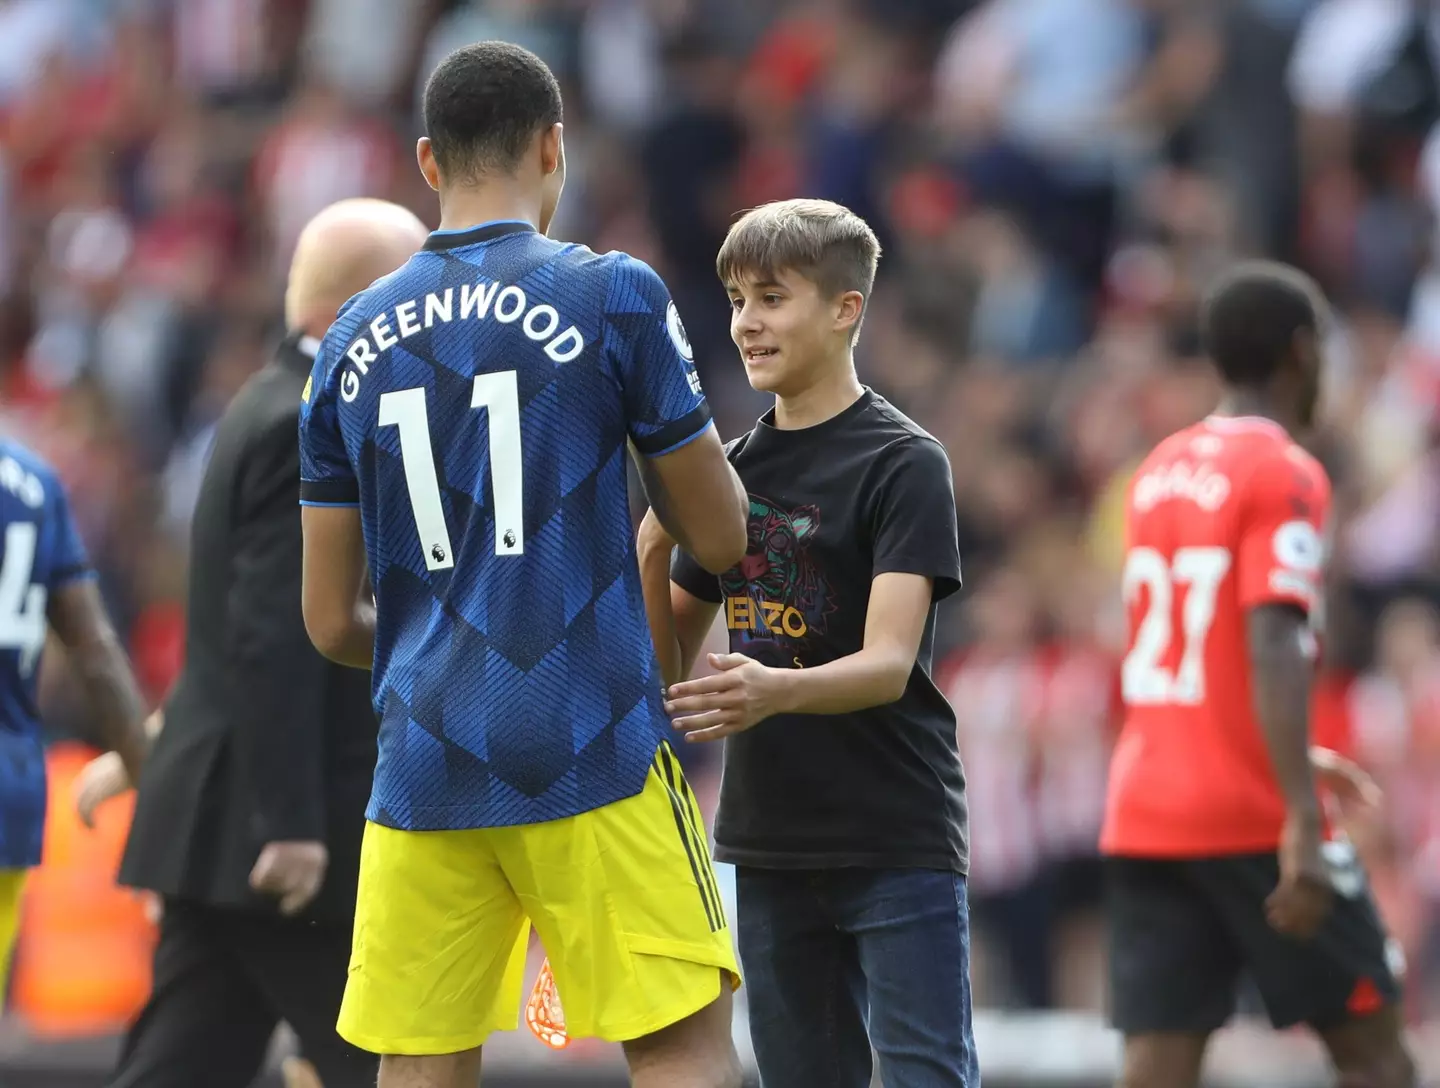 Mason Greenwood was a rising star at Manchester United before his arrest.